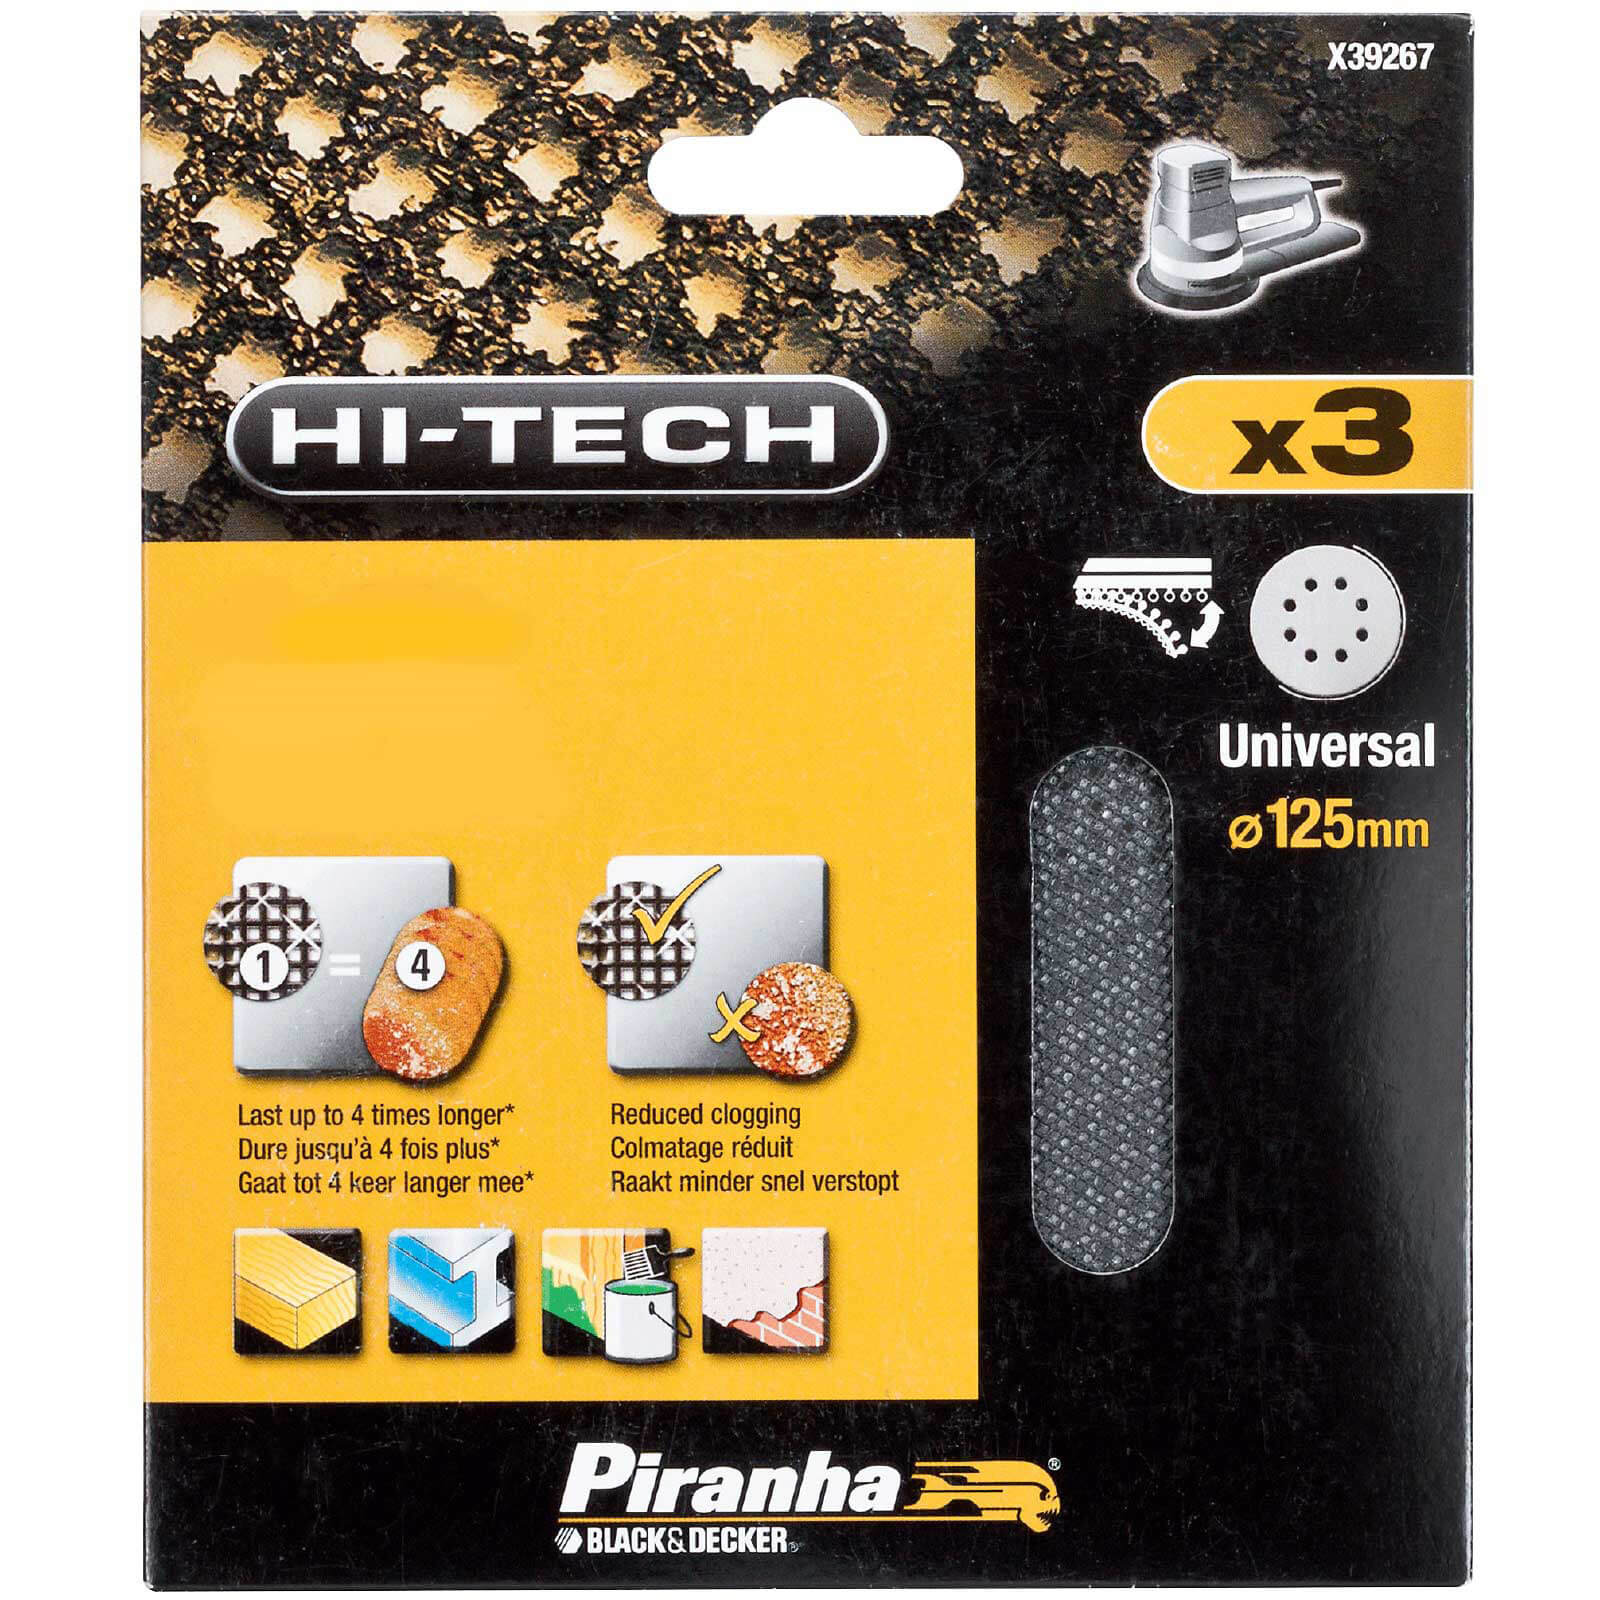 Image of Black and Decker Piranha Hi Tech Quick Fit Mesh ROS Sanding Sheets 125mm 125mm 80g Pack of 3